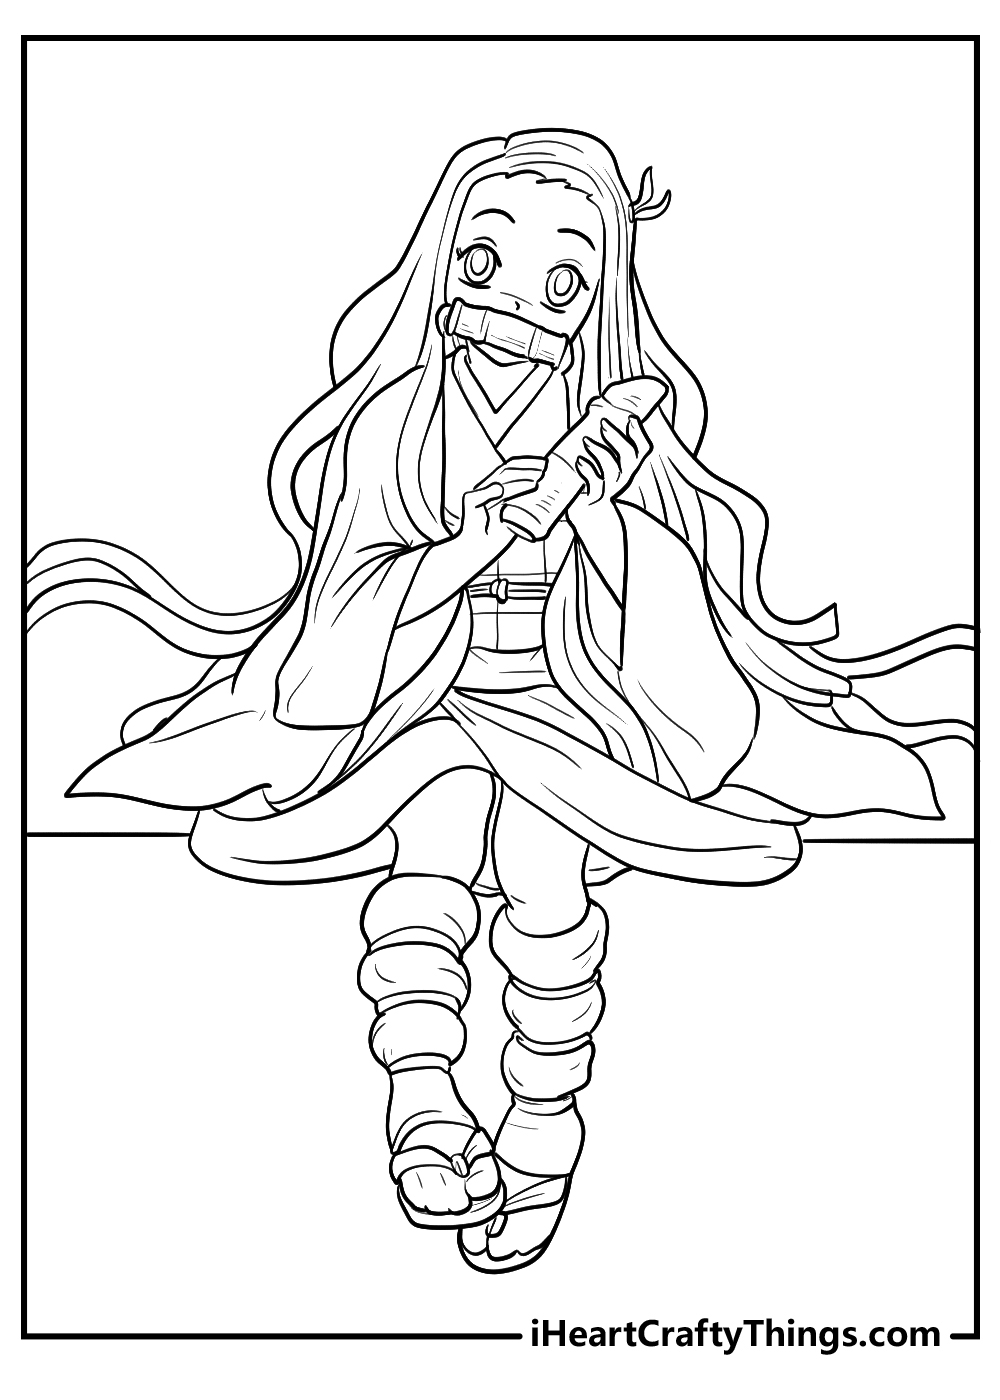 Printable nezuko coloring pages updated